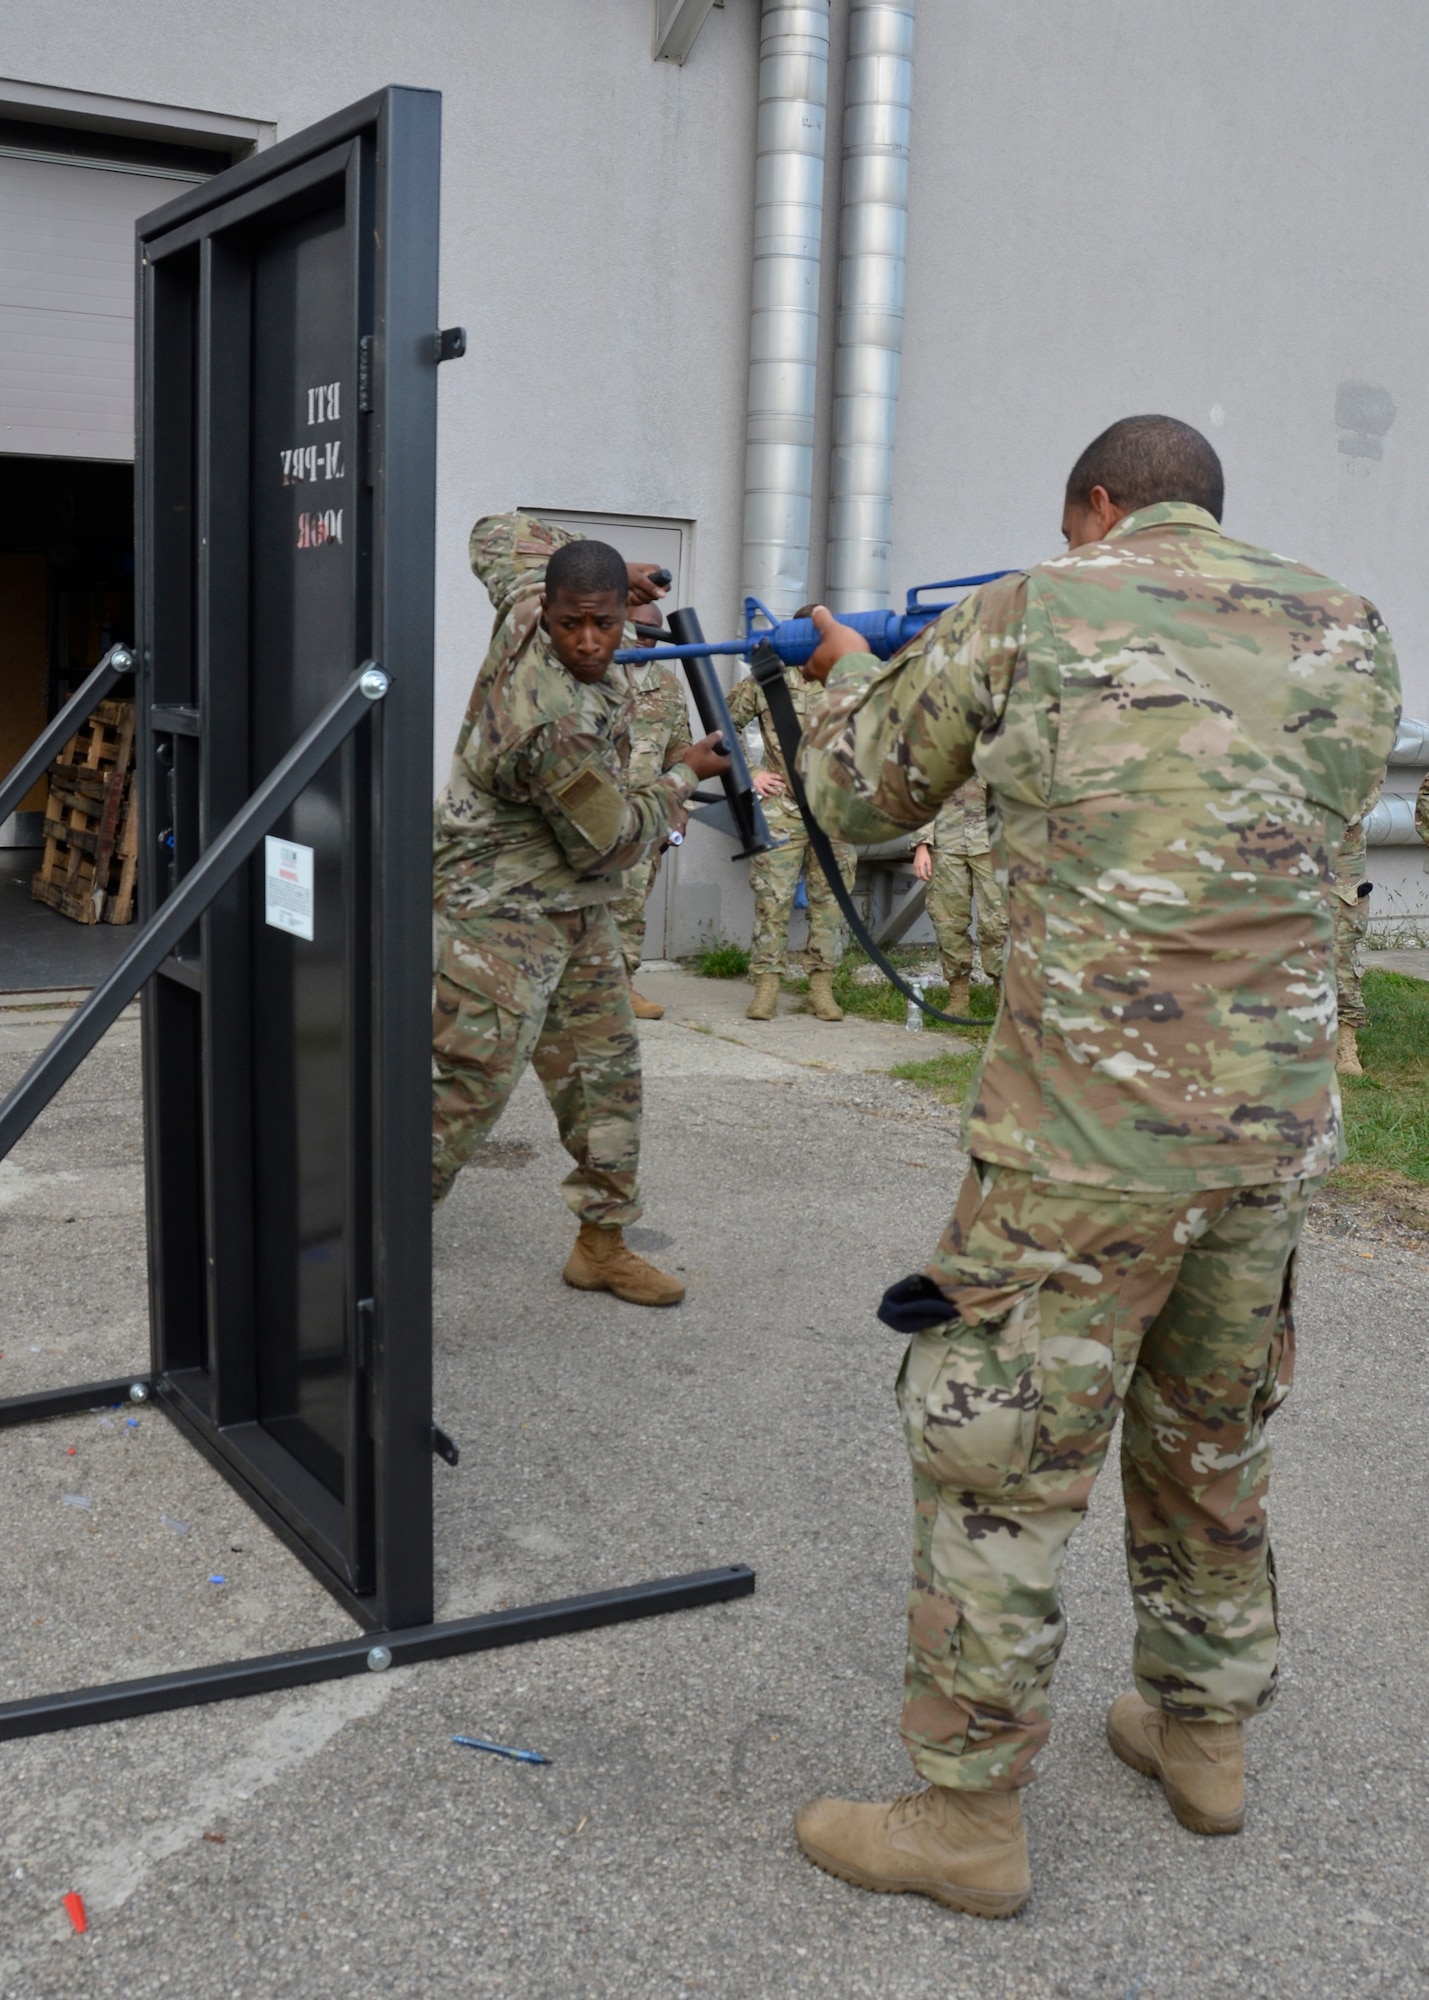 Senior Airman Daryn Weatherspoon, fire team member, 445th Security Forces Squadron, takes a swing at forcing open a metal training door outside the squadron on September 8, 2019 as Staff Sgt. Andrew Swasey, fire team member, looks on. The training, designed to give Airmen the opportunity to practice breaching locked doors, included several types of tools and simulated various team dynamics. (U.S. Air Force photo/1st Lt. Rachel Ingram)